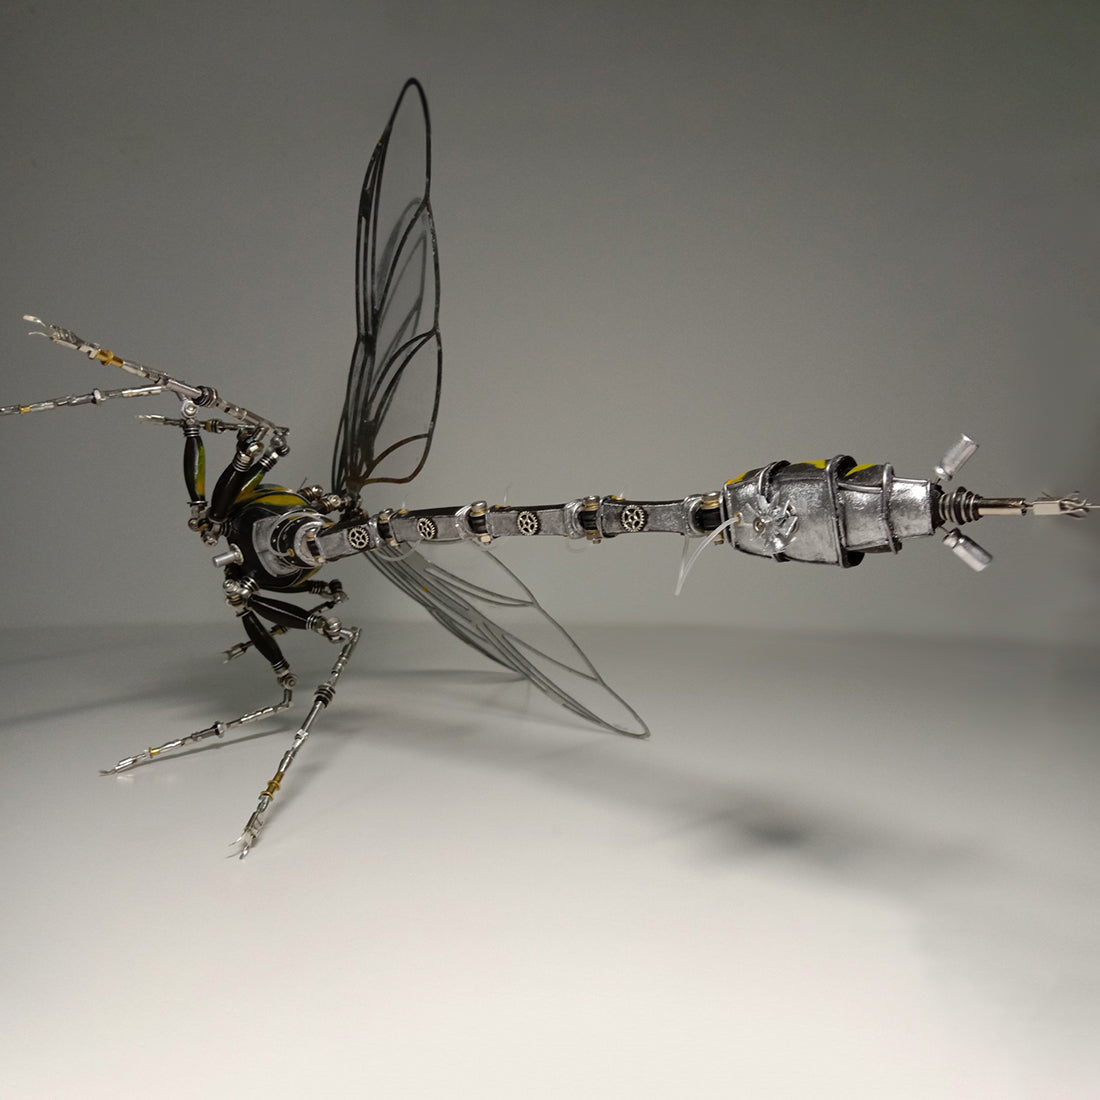 Metal Dragonfly King Assembled Model Kits 3D Handmade Bug Insect Sculpture Steampunk